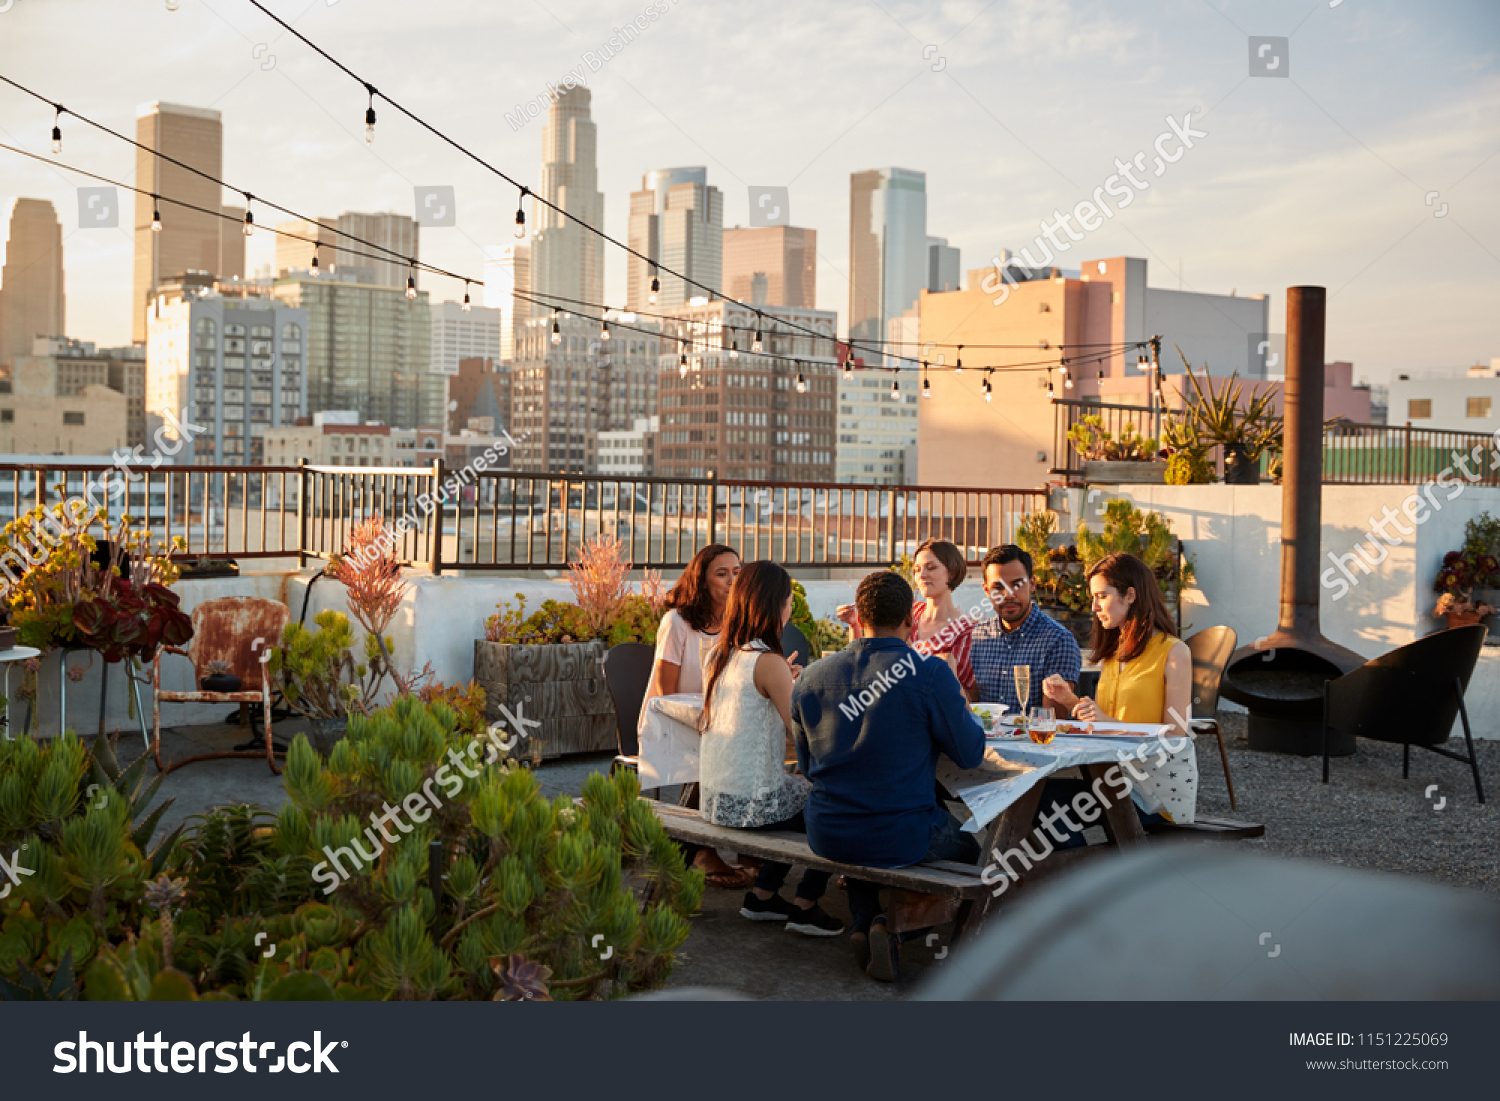 Friends Gathered On Rooftop Terrace For Meal With City Skyline In Background #1151225069